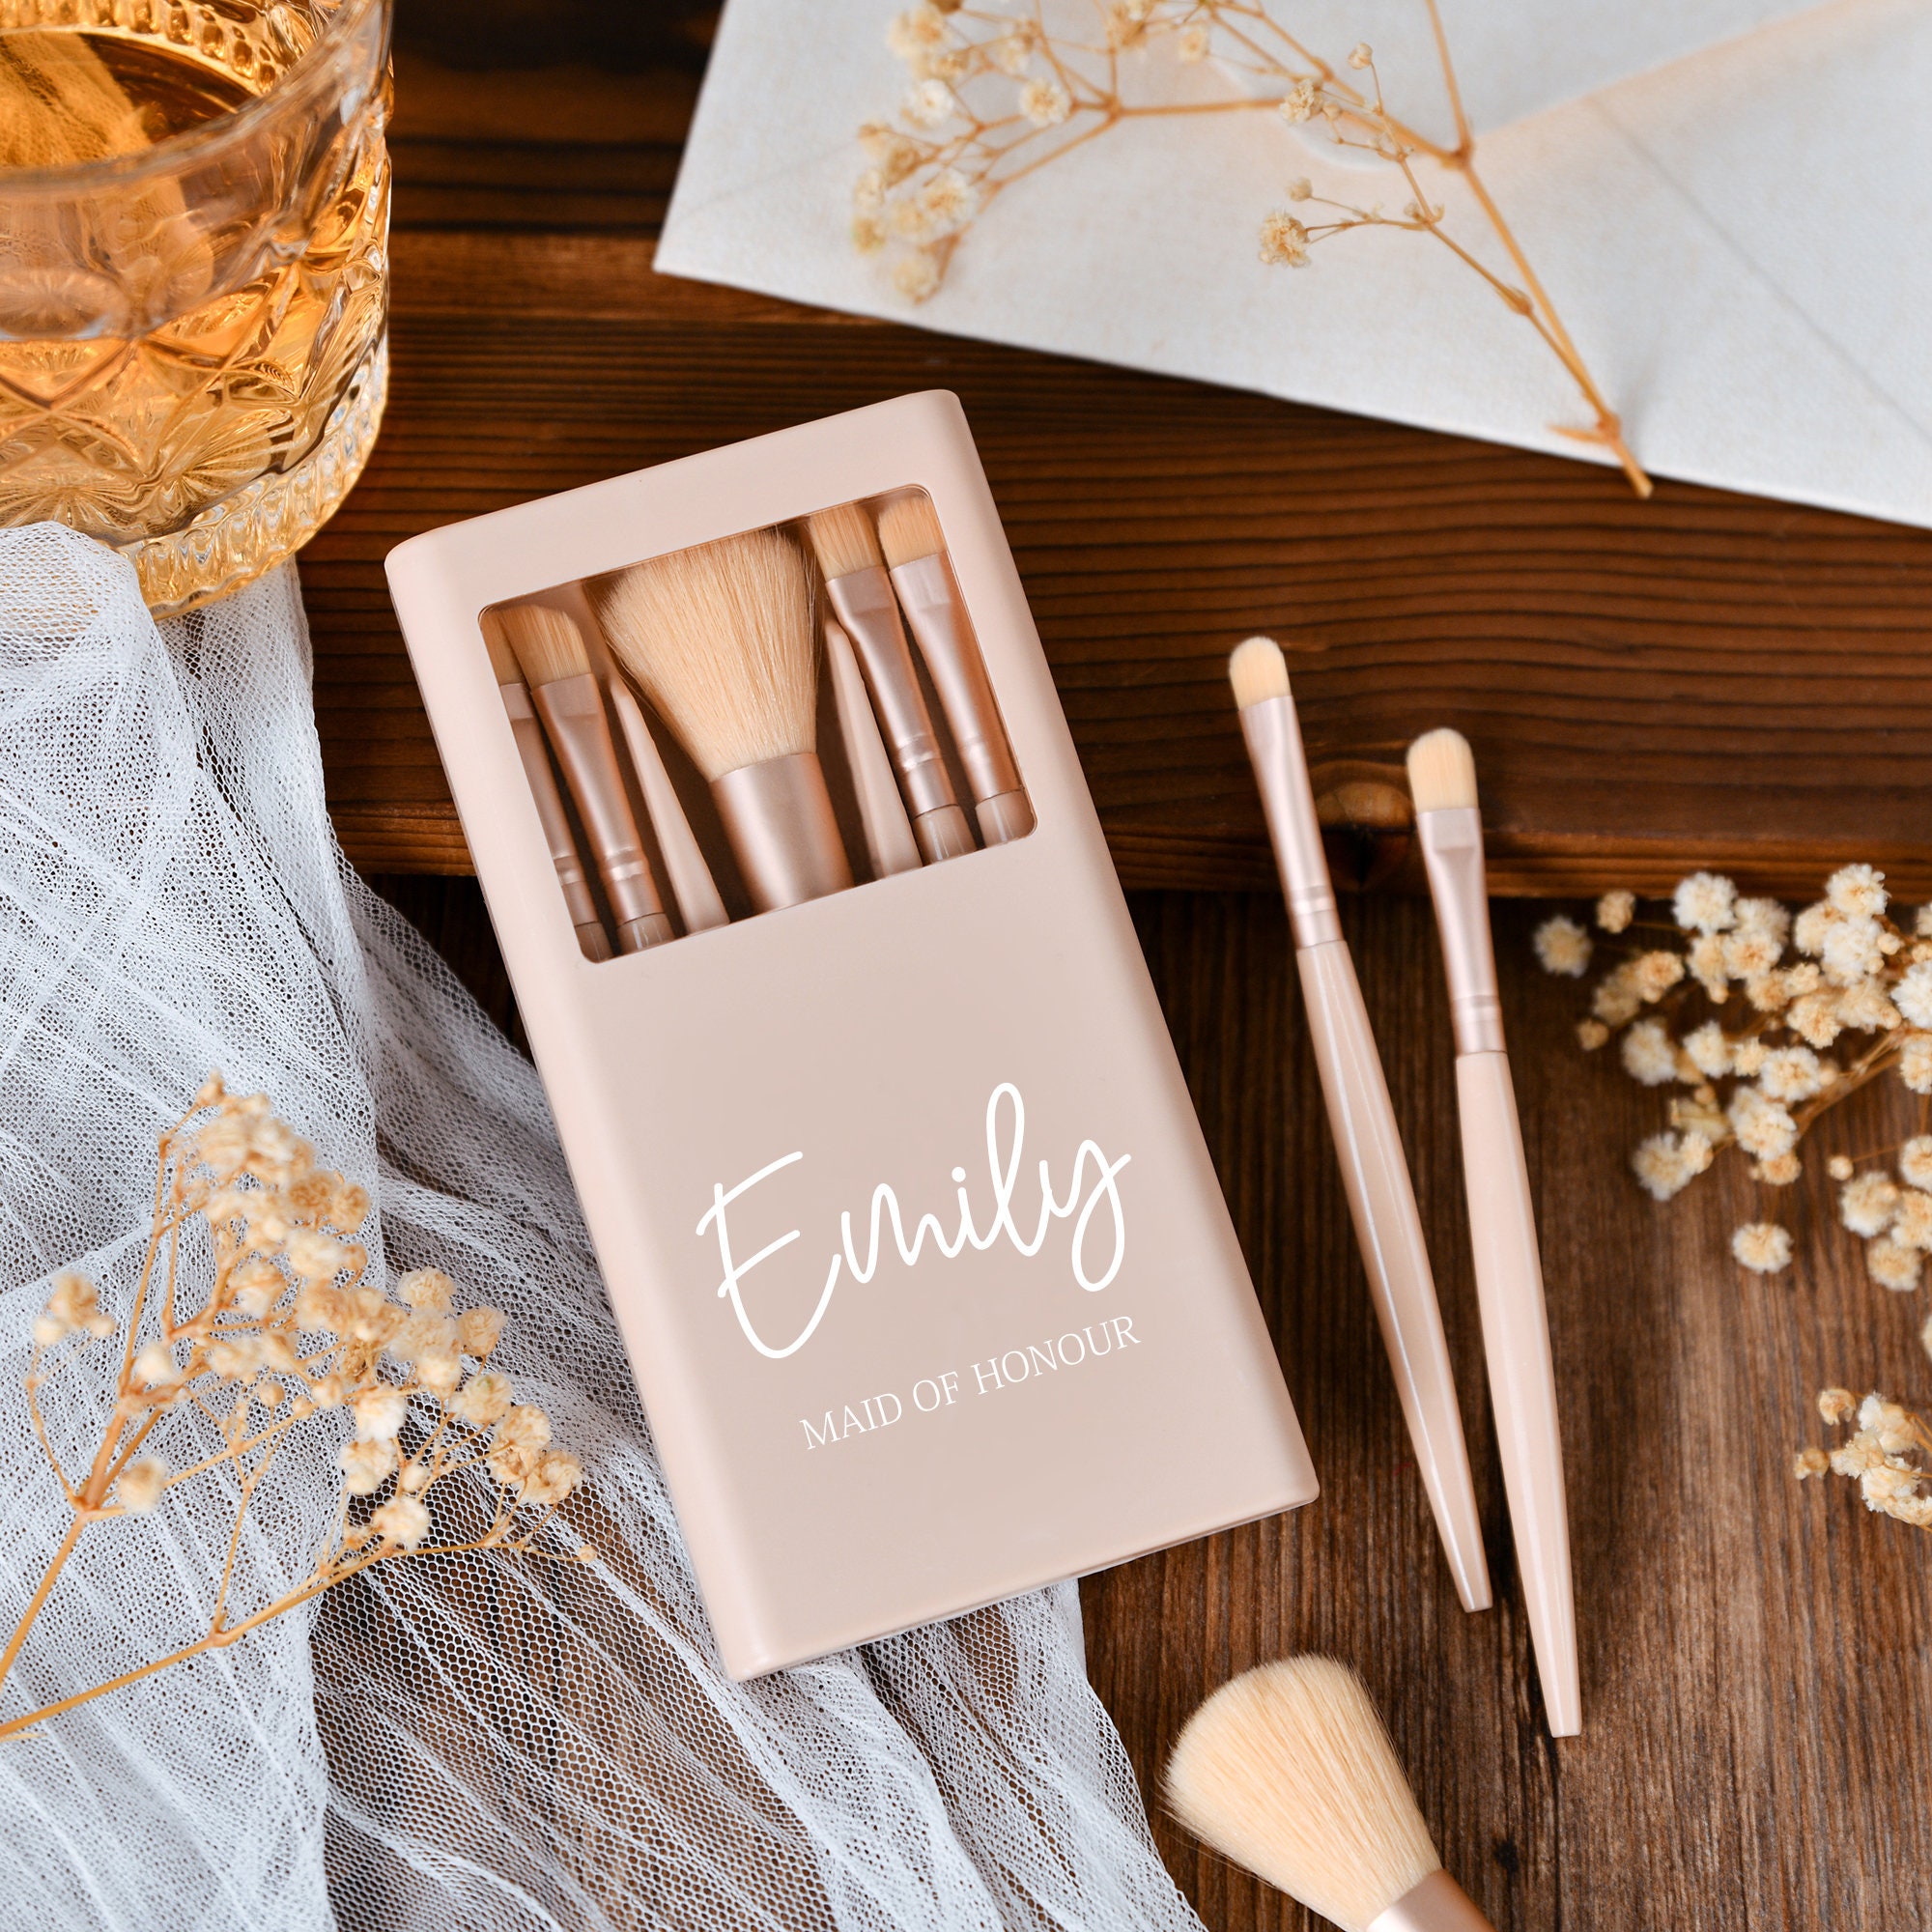 Top Bridal Vanity Box Designs To Buy Online For Your Wedding